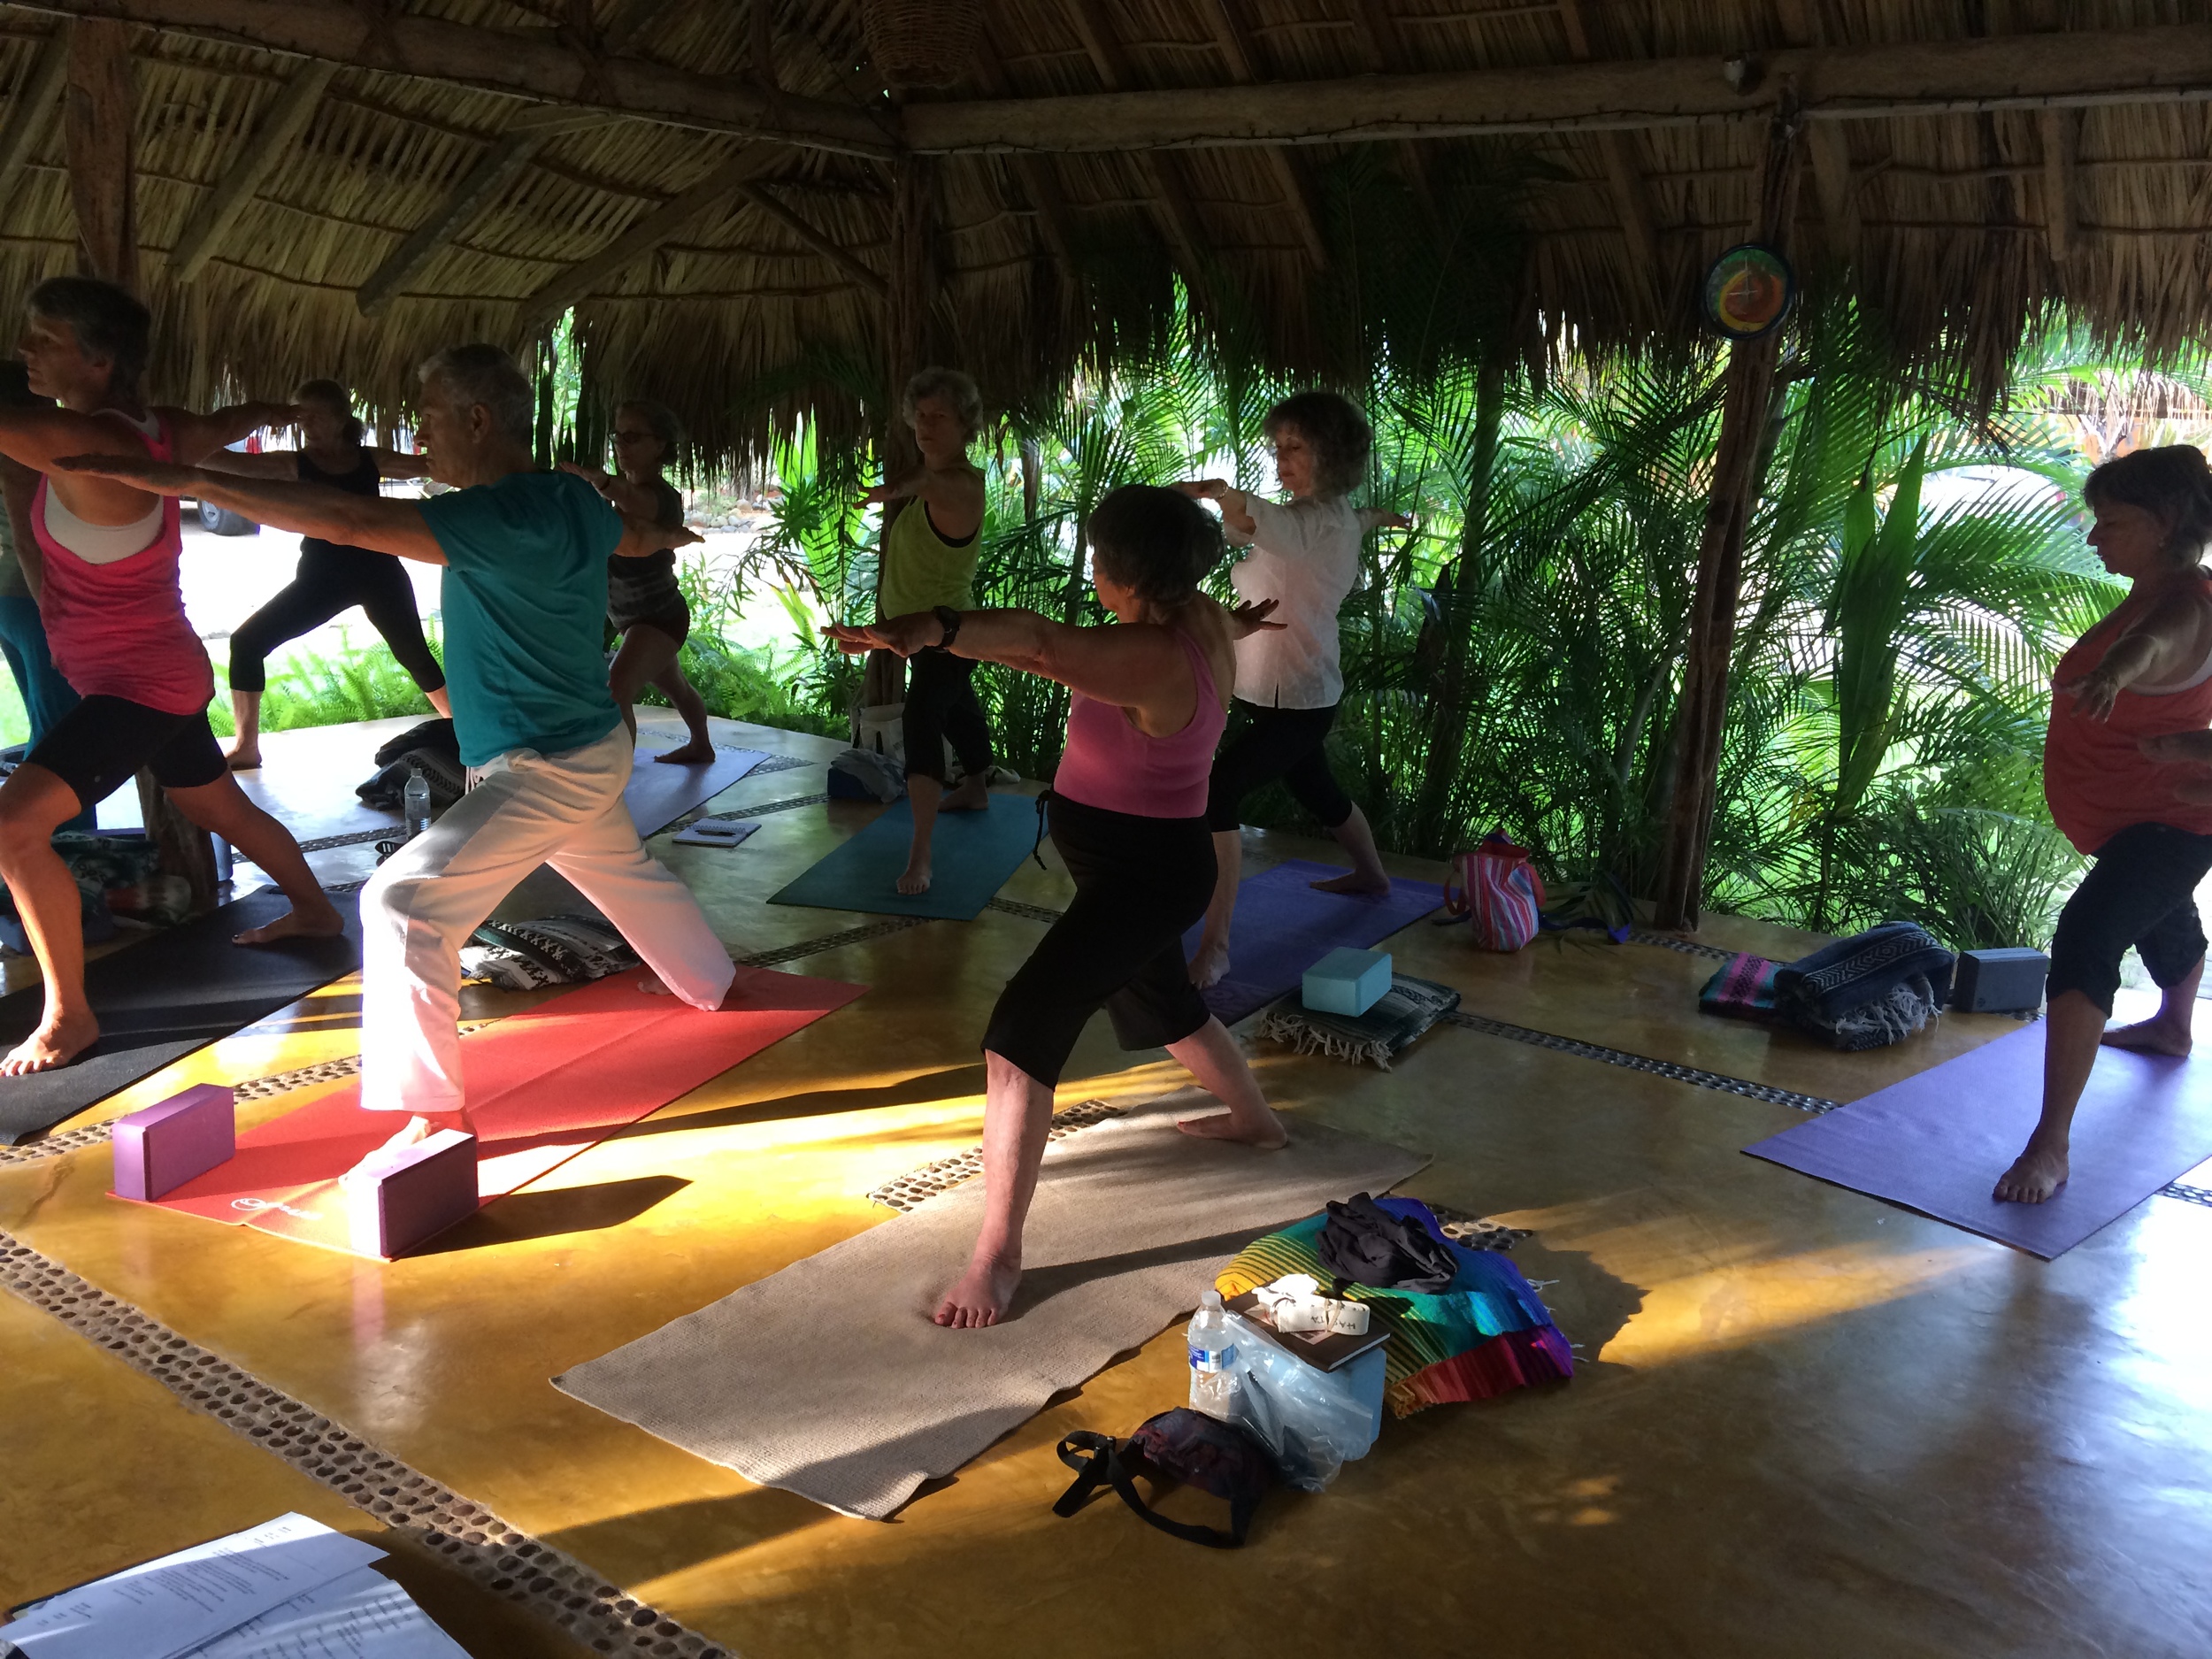 Yogis in Mexico - January '15